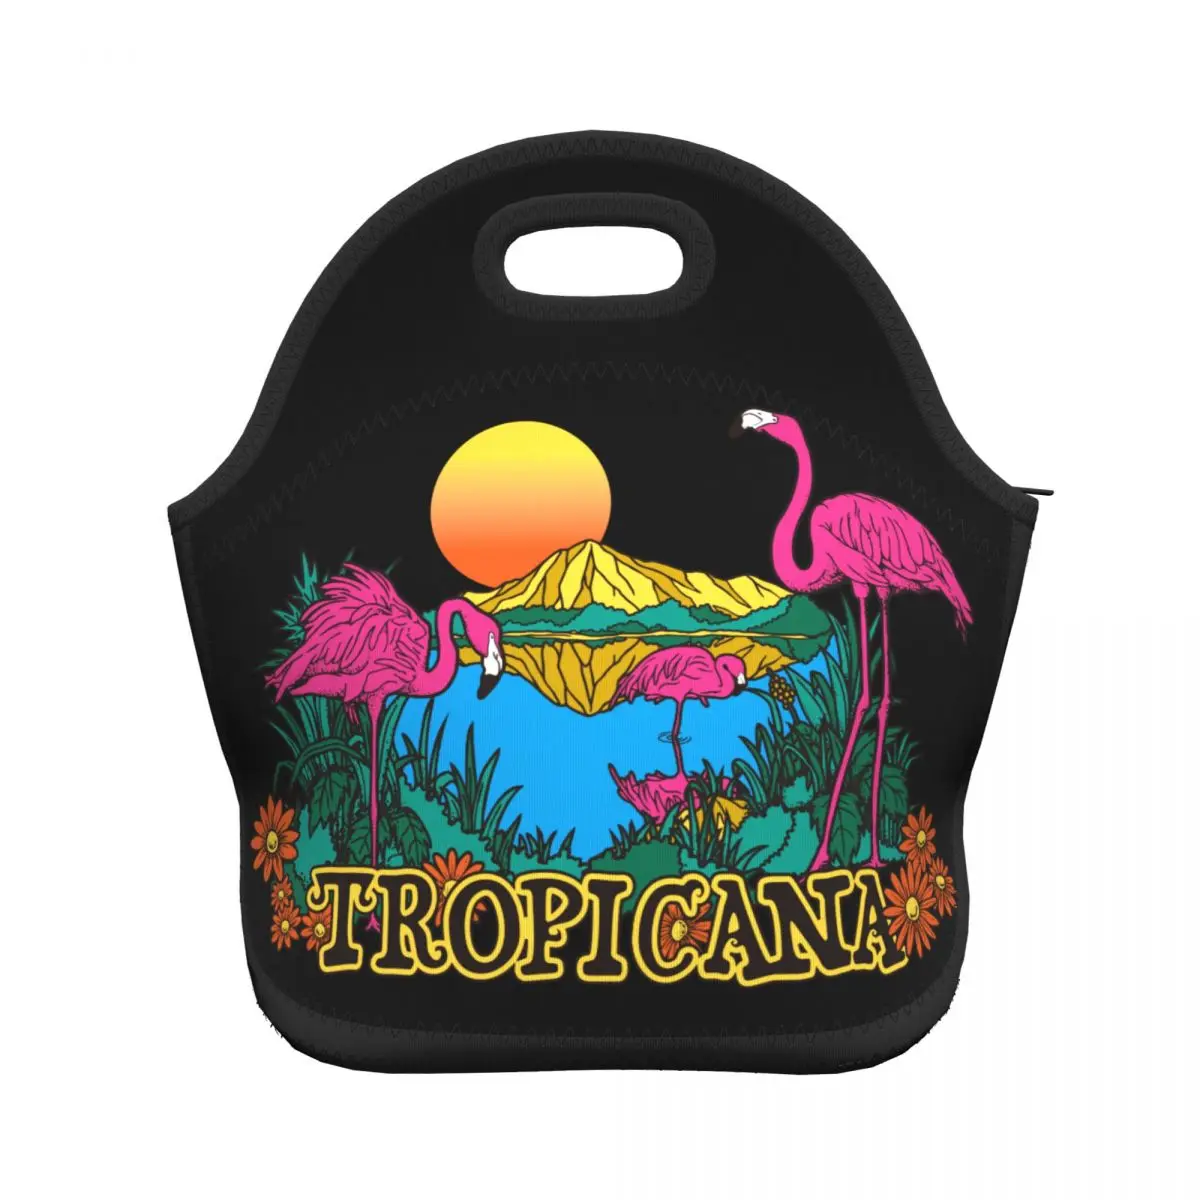 

Flamingo Women Girls Lunch Bags for Work School Picnic Camping Neoprene Top Handle Lunch Box Fruits Drinks Organizer Pouch Bags